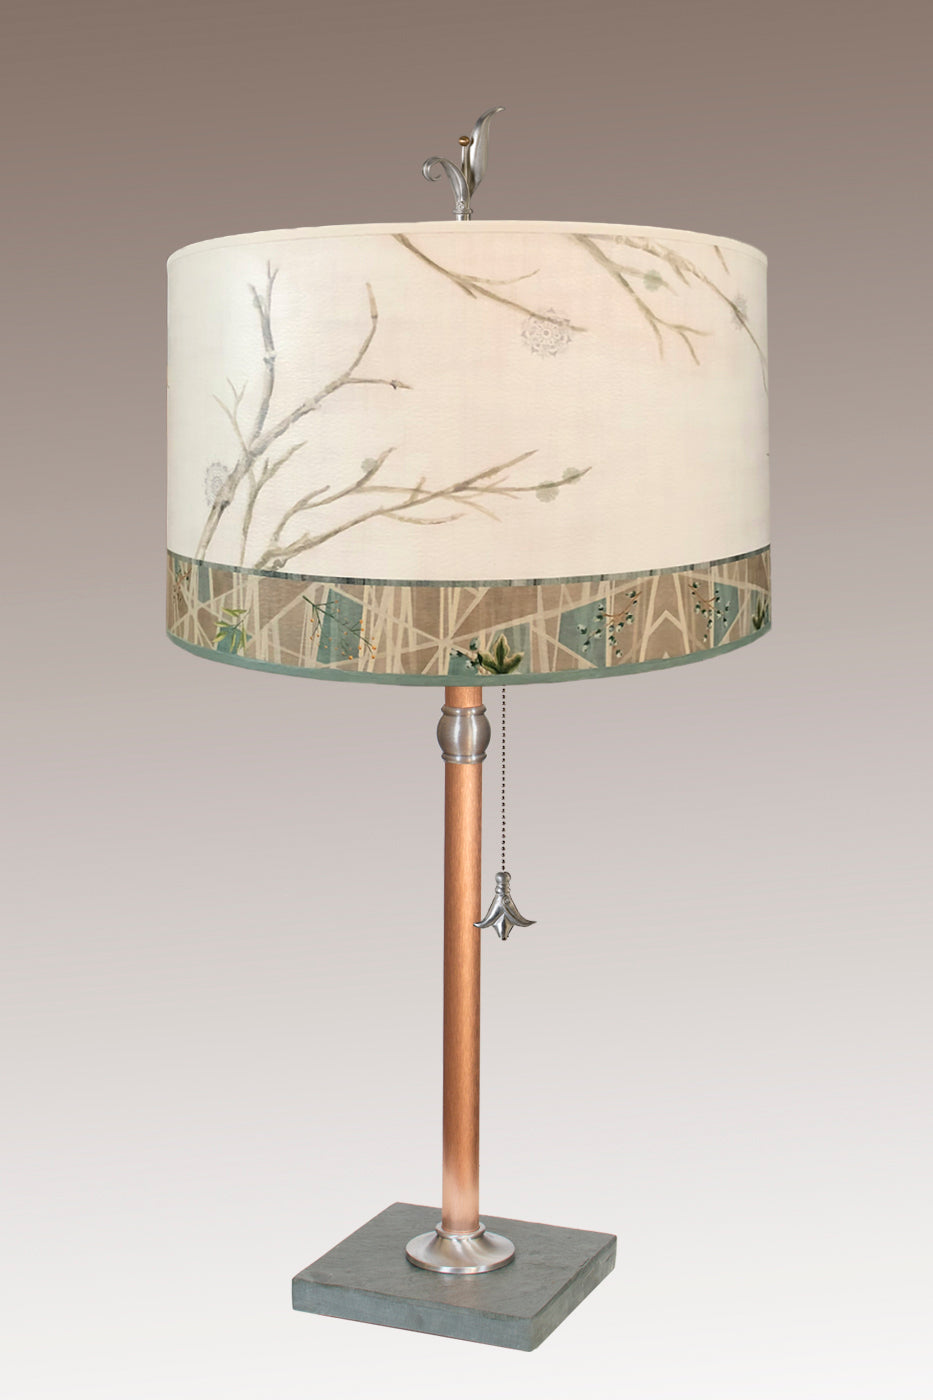 Janna Ugone &amp; Co Table Lamps Copper Table Lamp with Large Drum Shade in Prism Branch